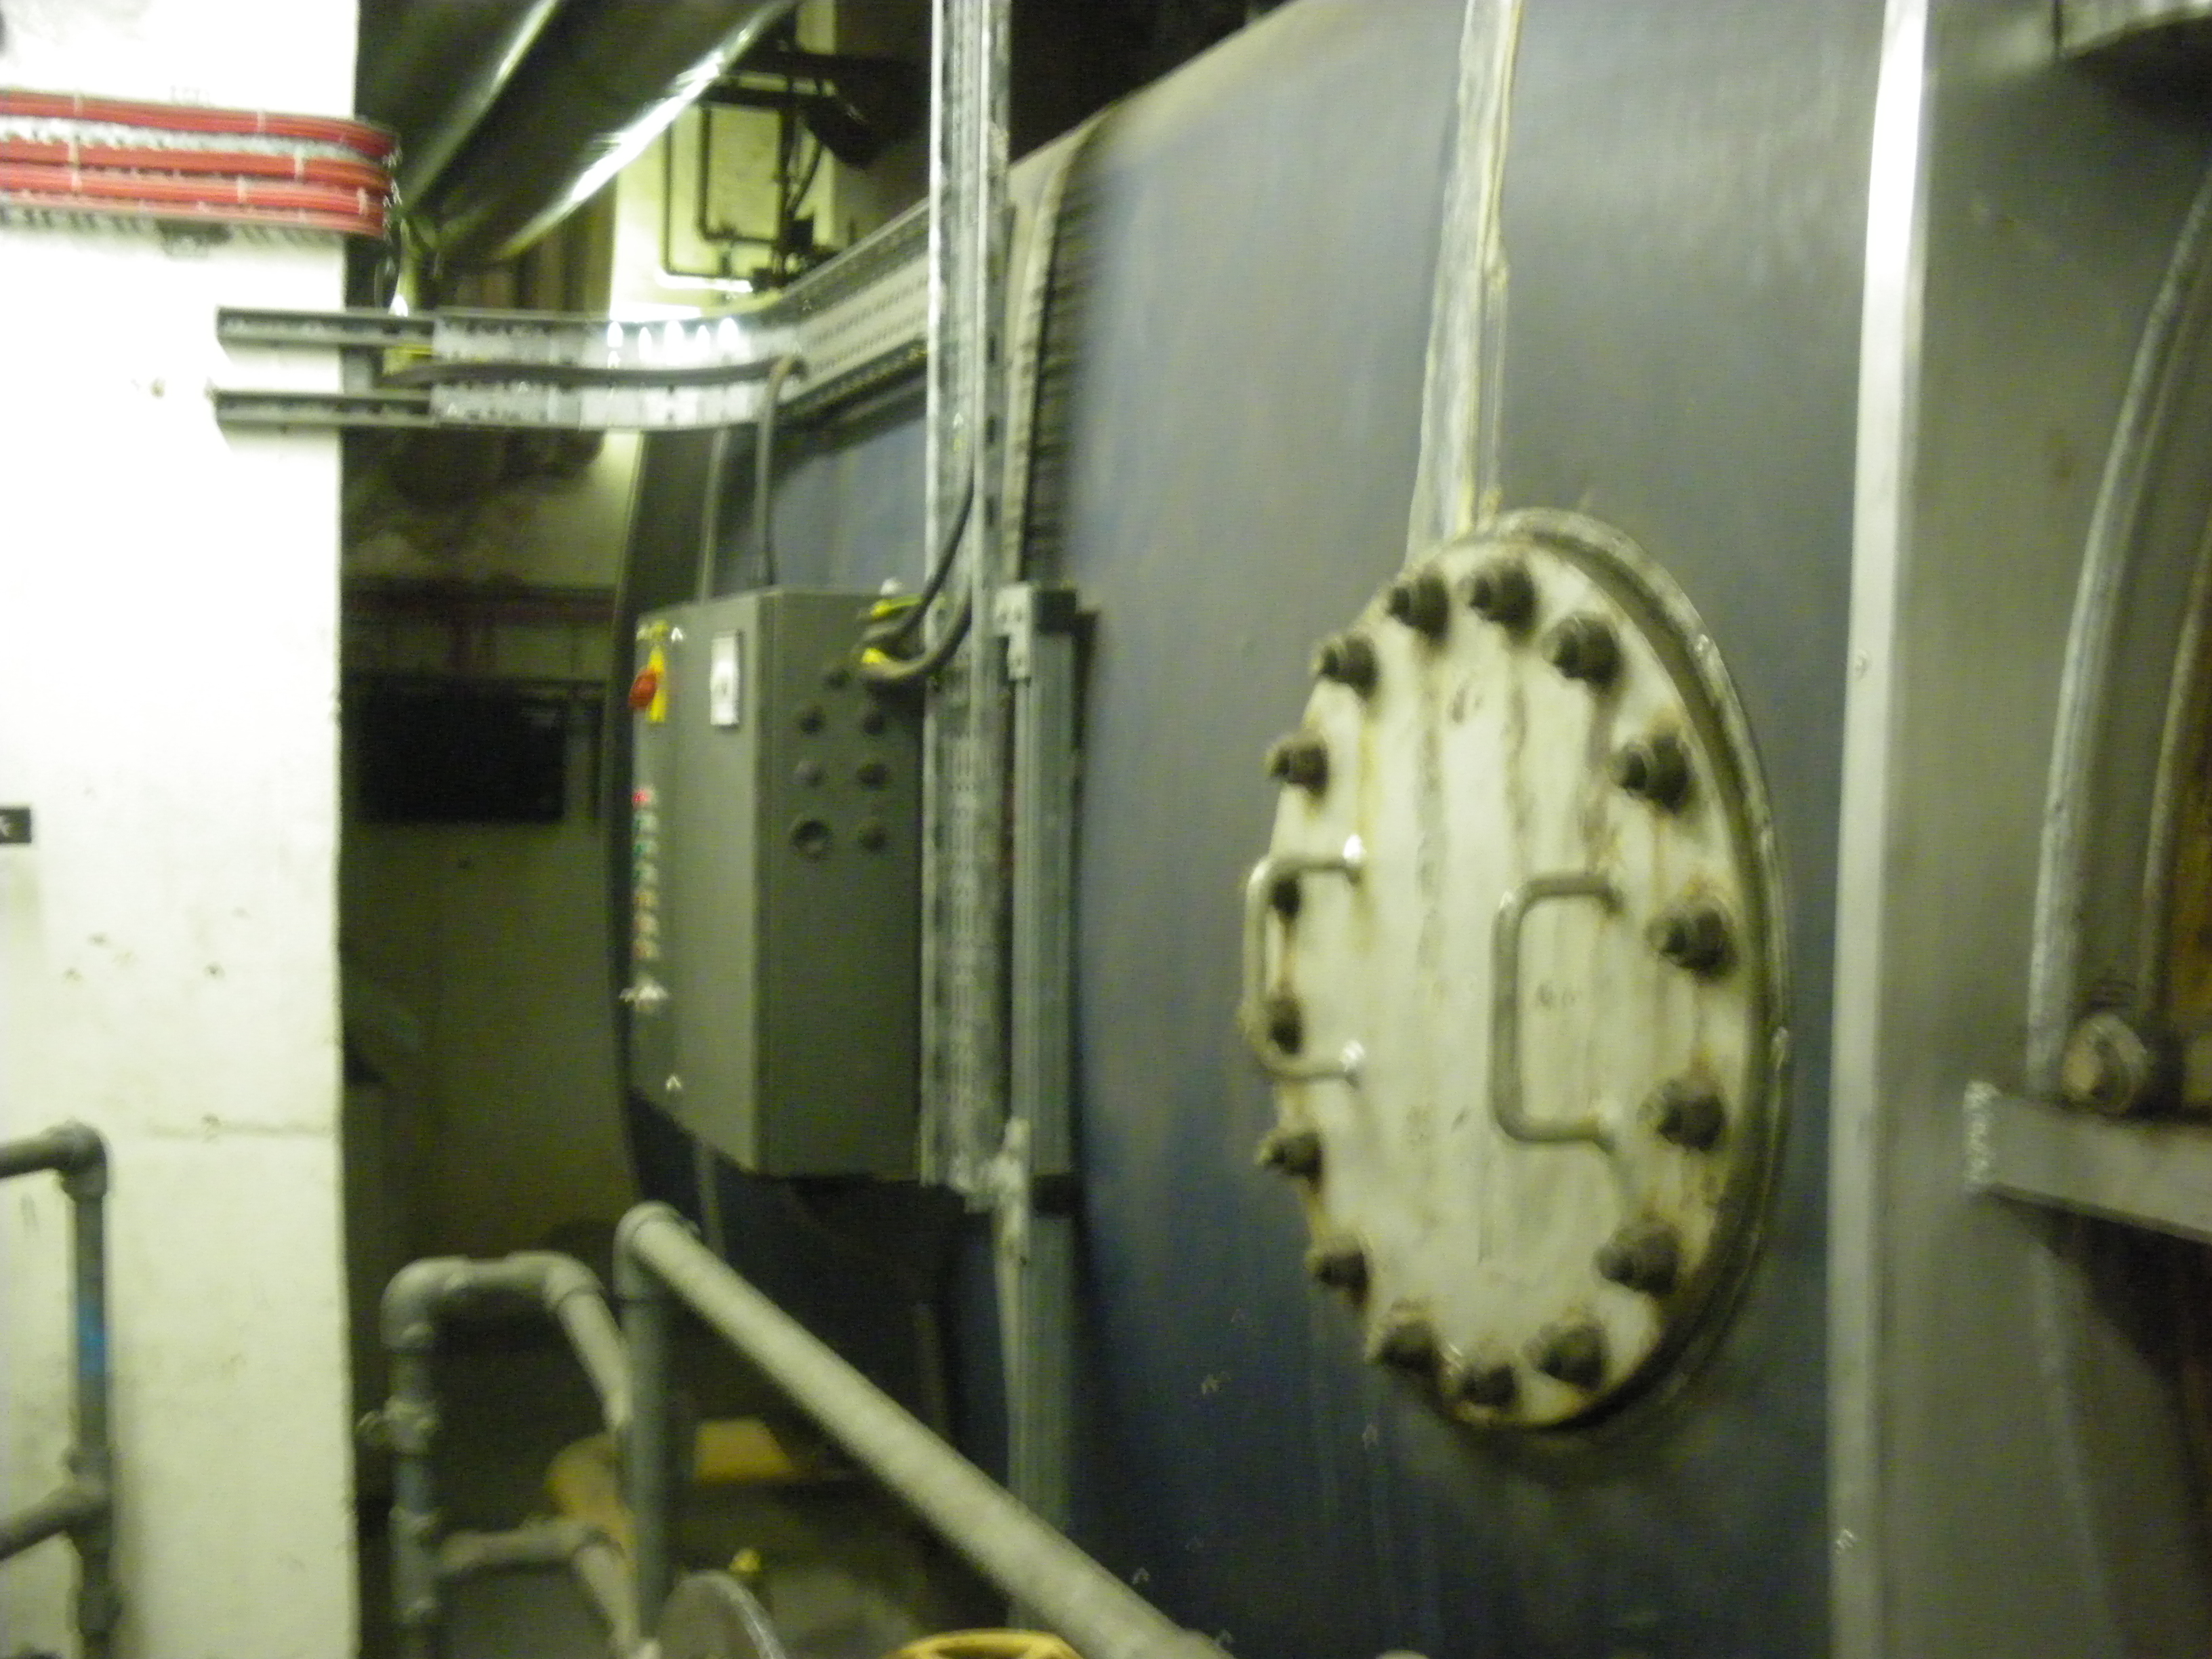 One of the two 1980s gas-fired boilers